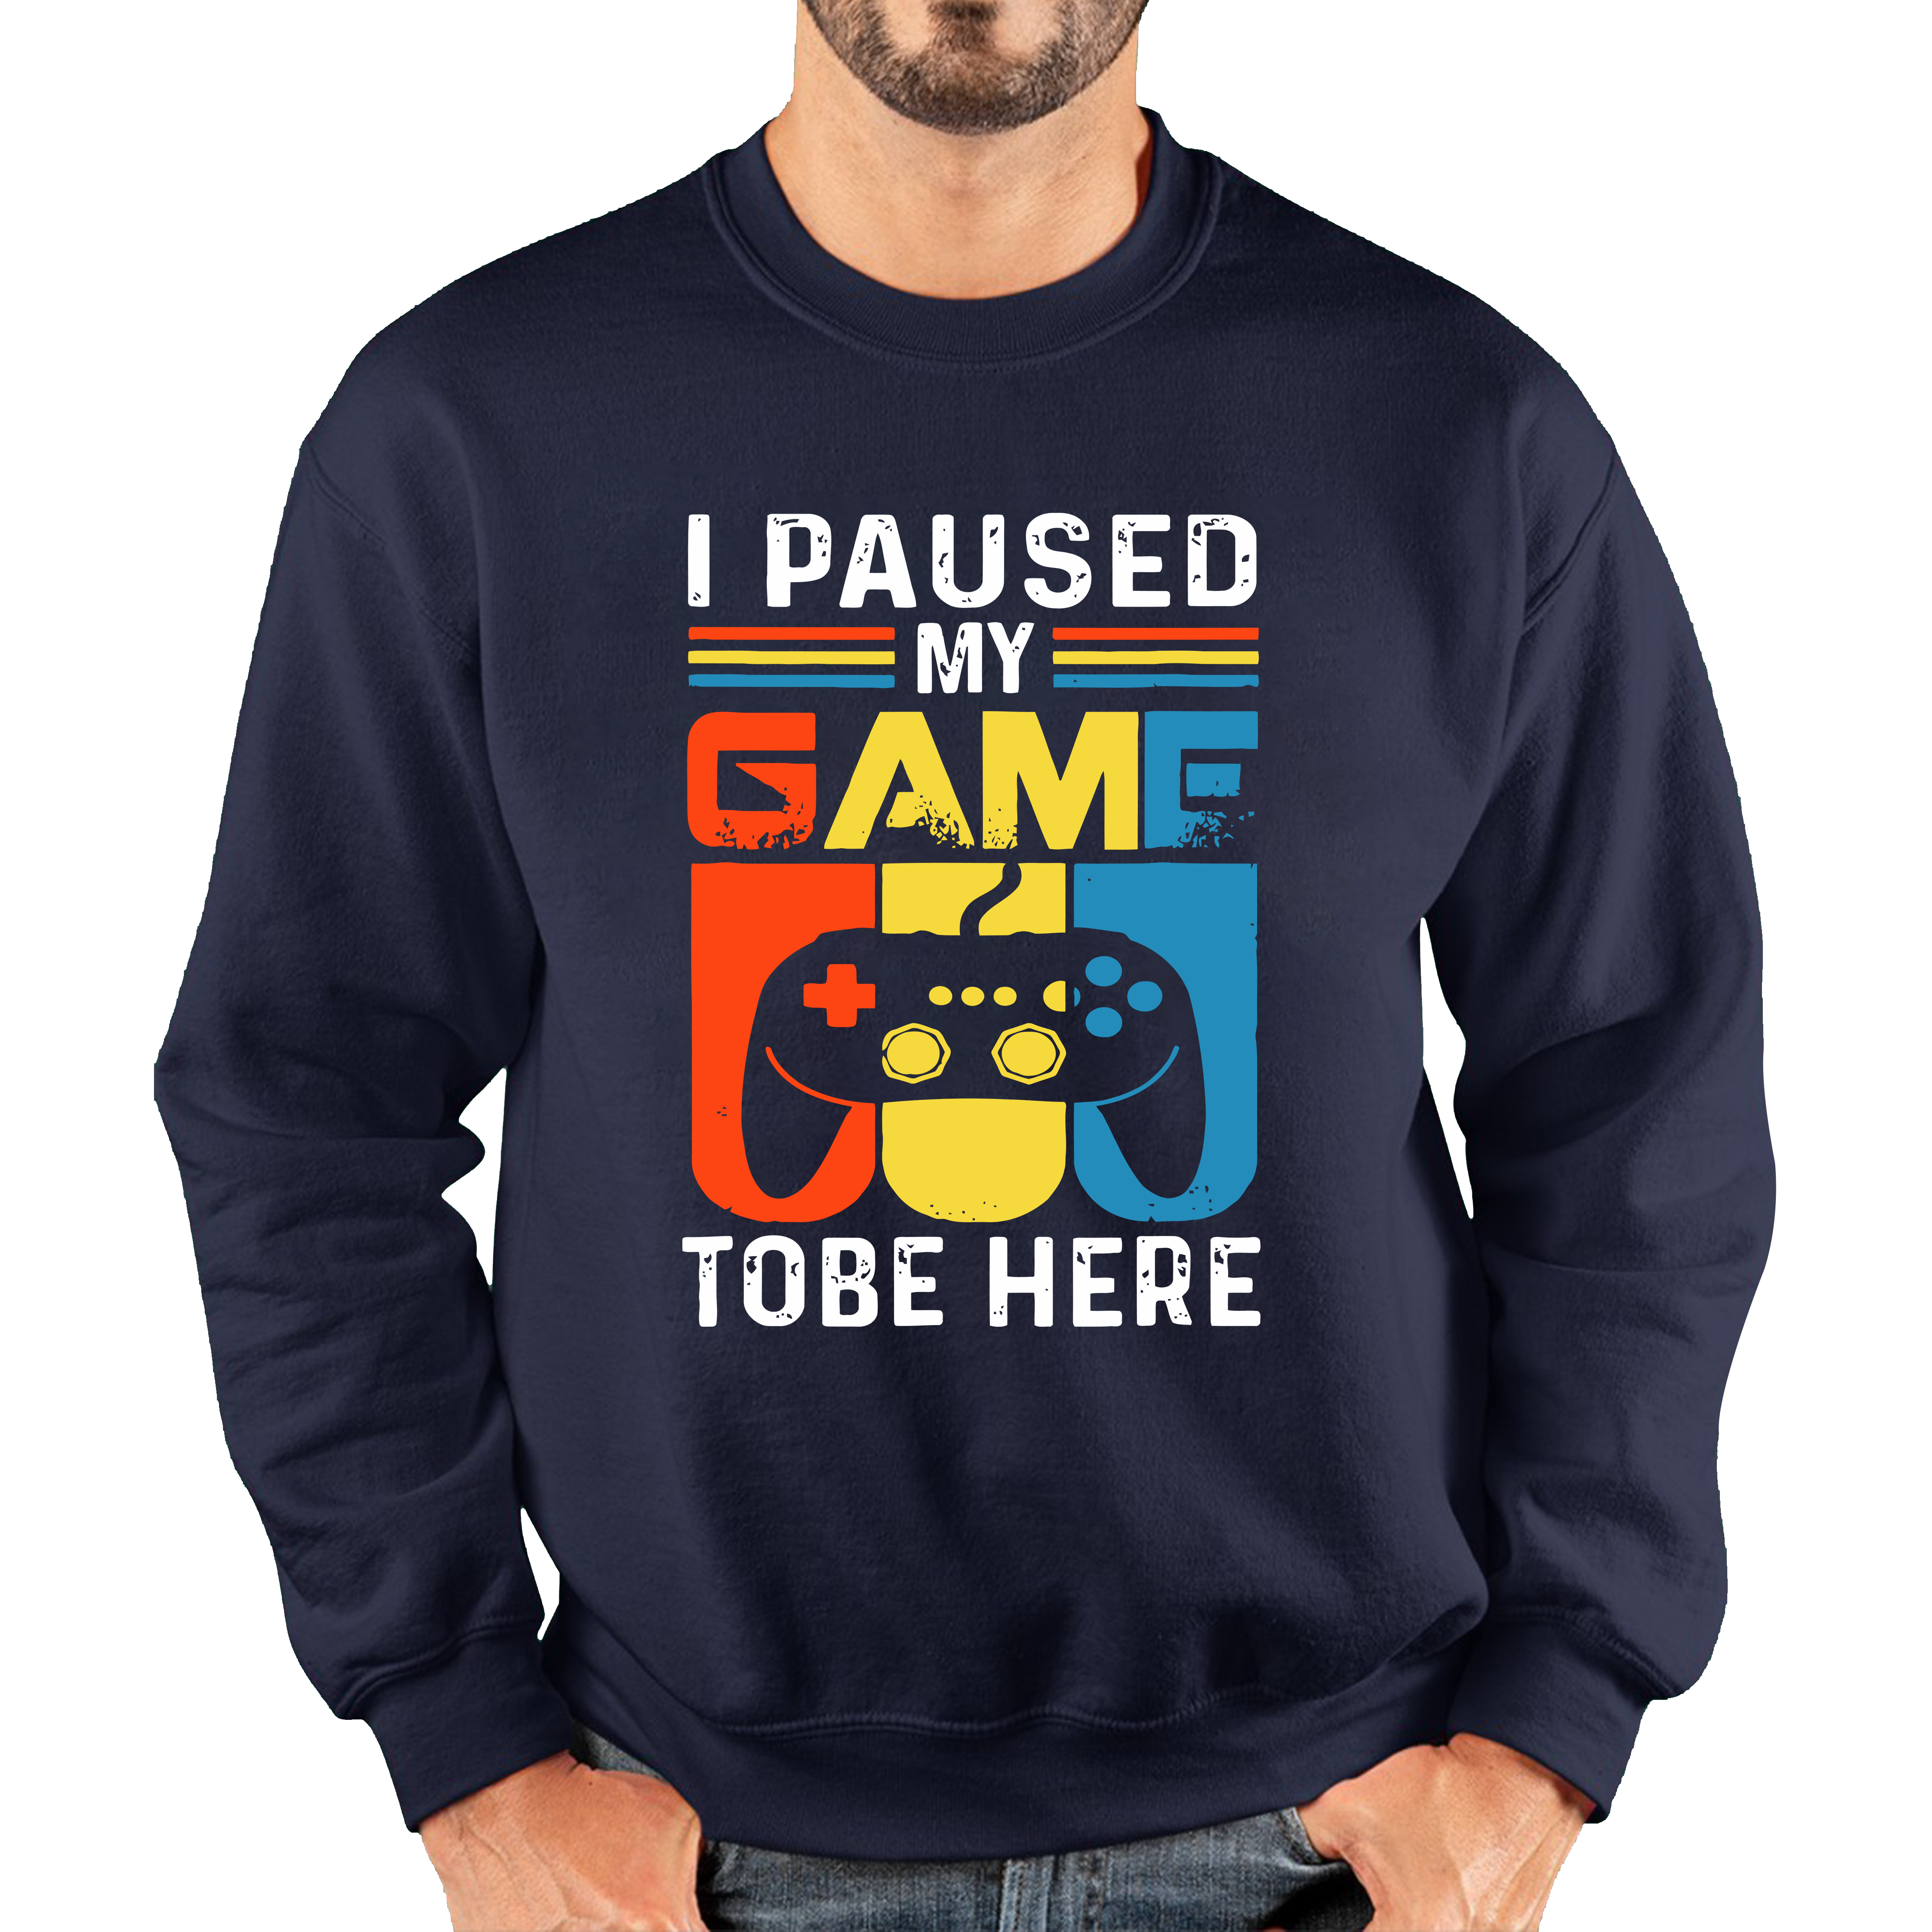 I Paused My Game To Be Here Funny Novelty Sarcastic Video Game Adult Sweatshirt